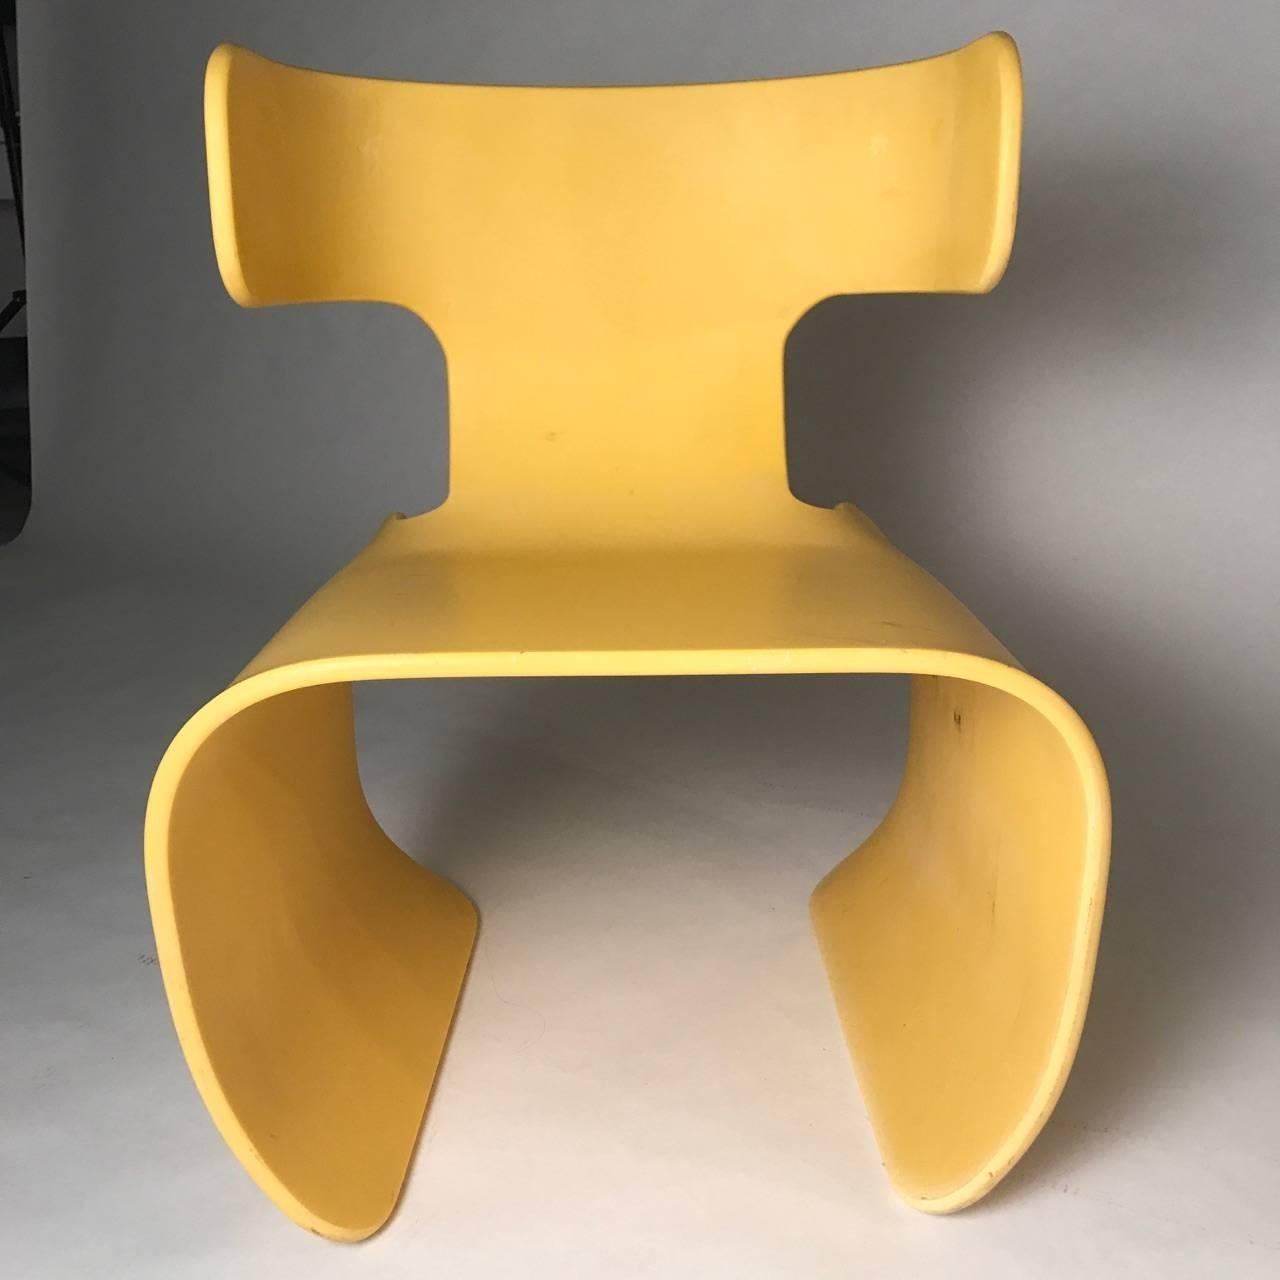 Modern Chair of Yellow Resin, Prototype, circa 1980 For Sale